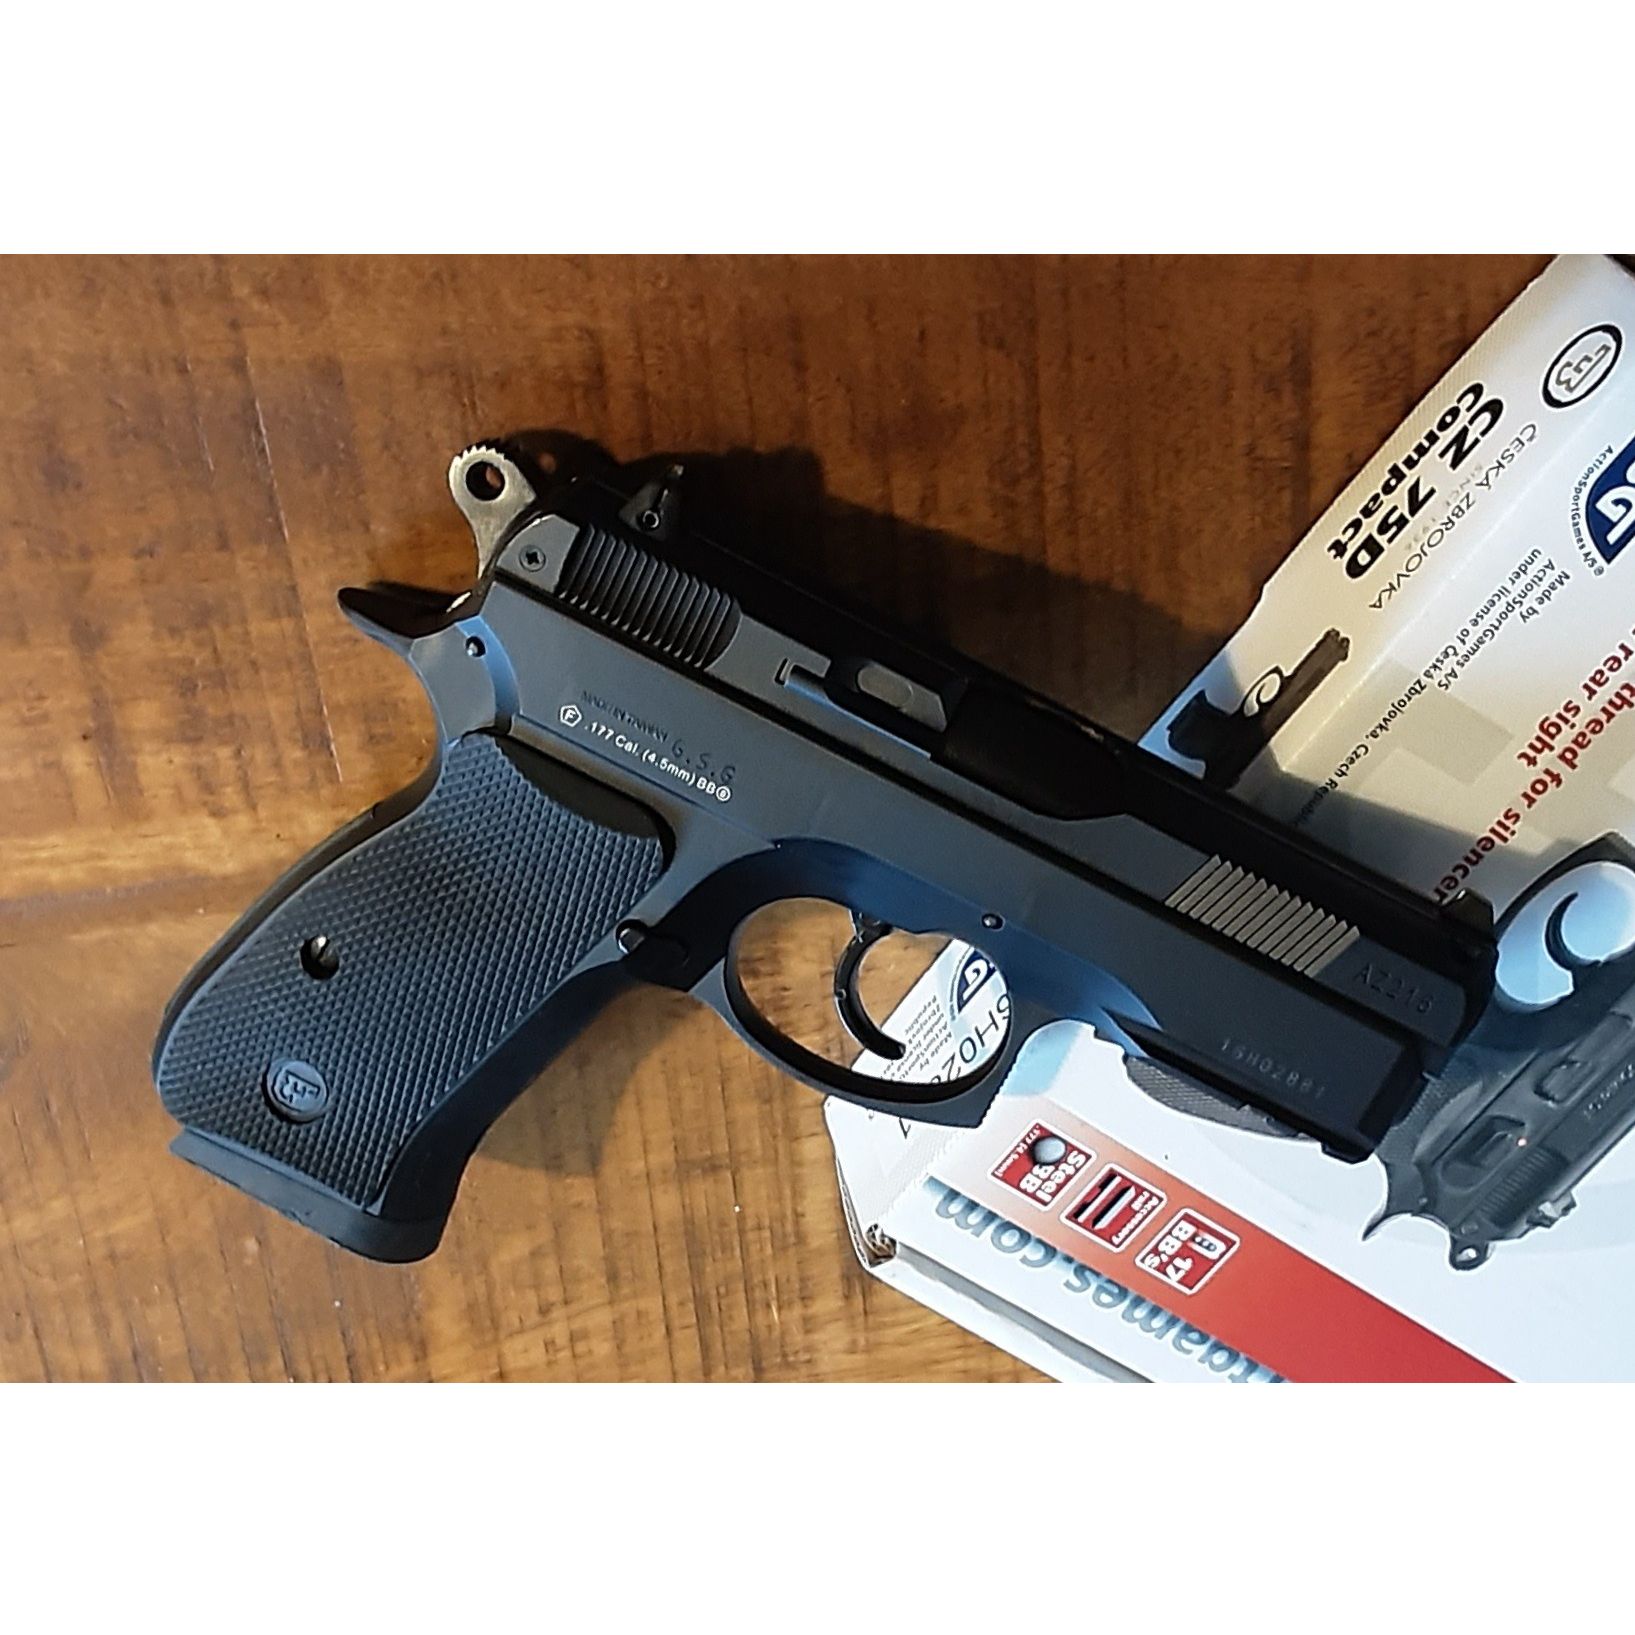 Co2-Pistole CZ75D Compact in 4,5 mm Stahl BB Co2 Non Blow Back 